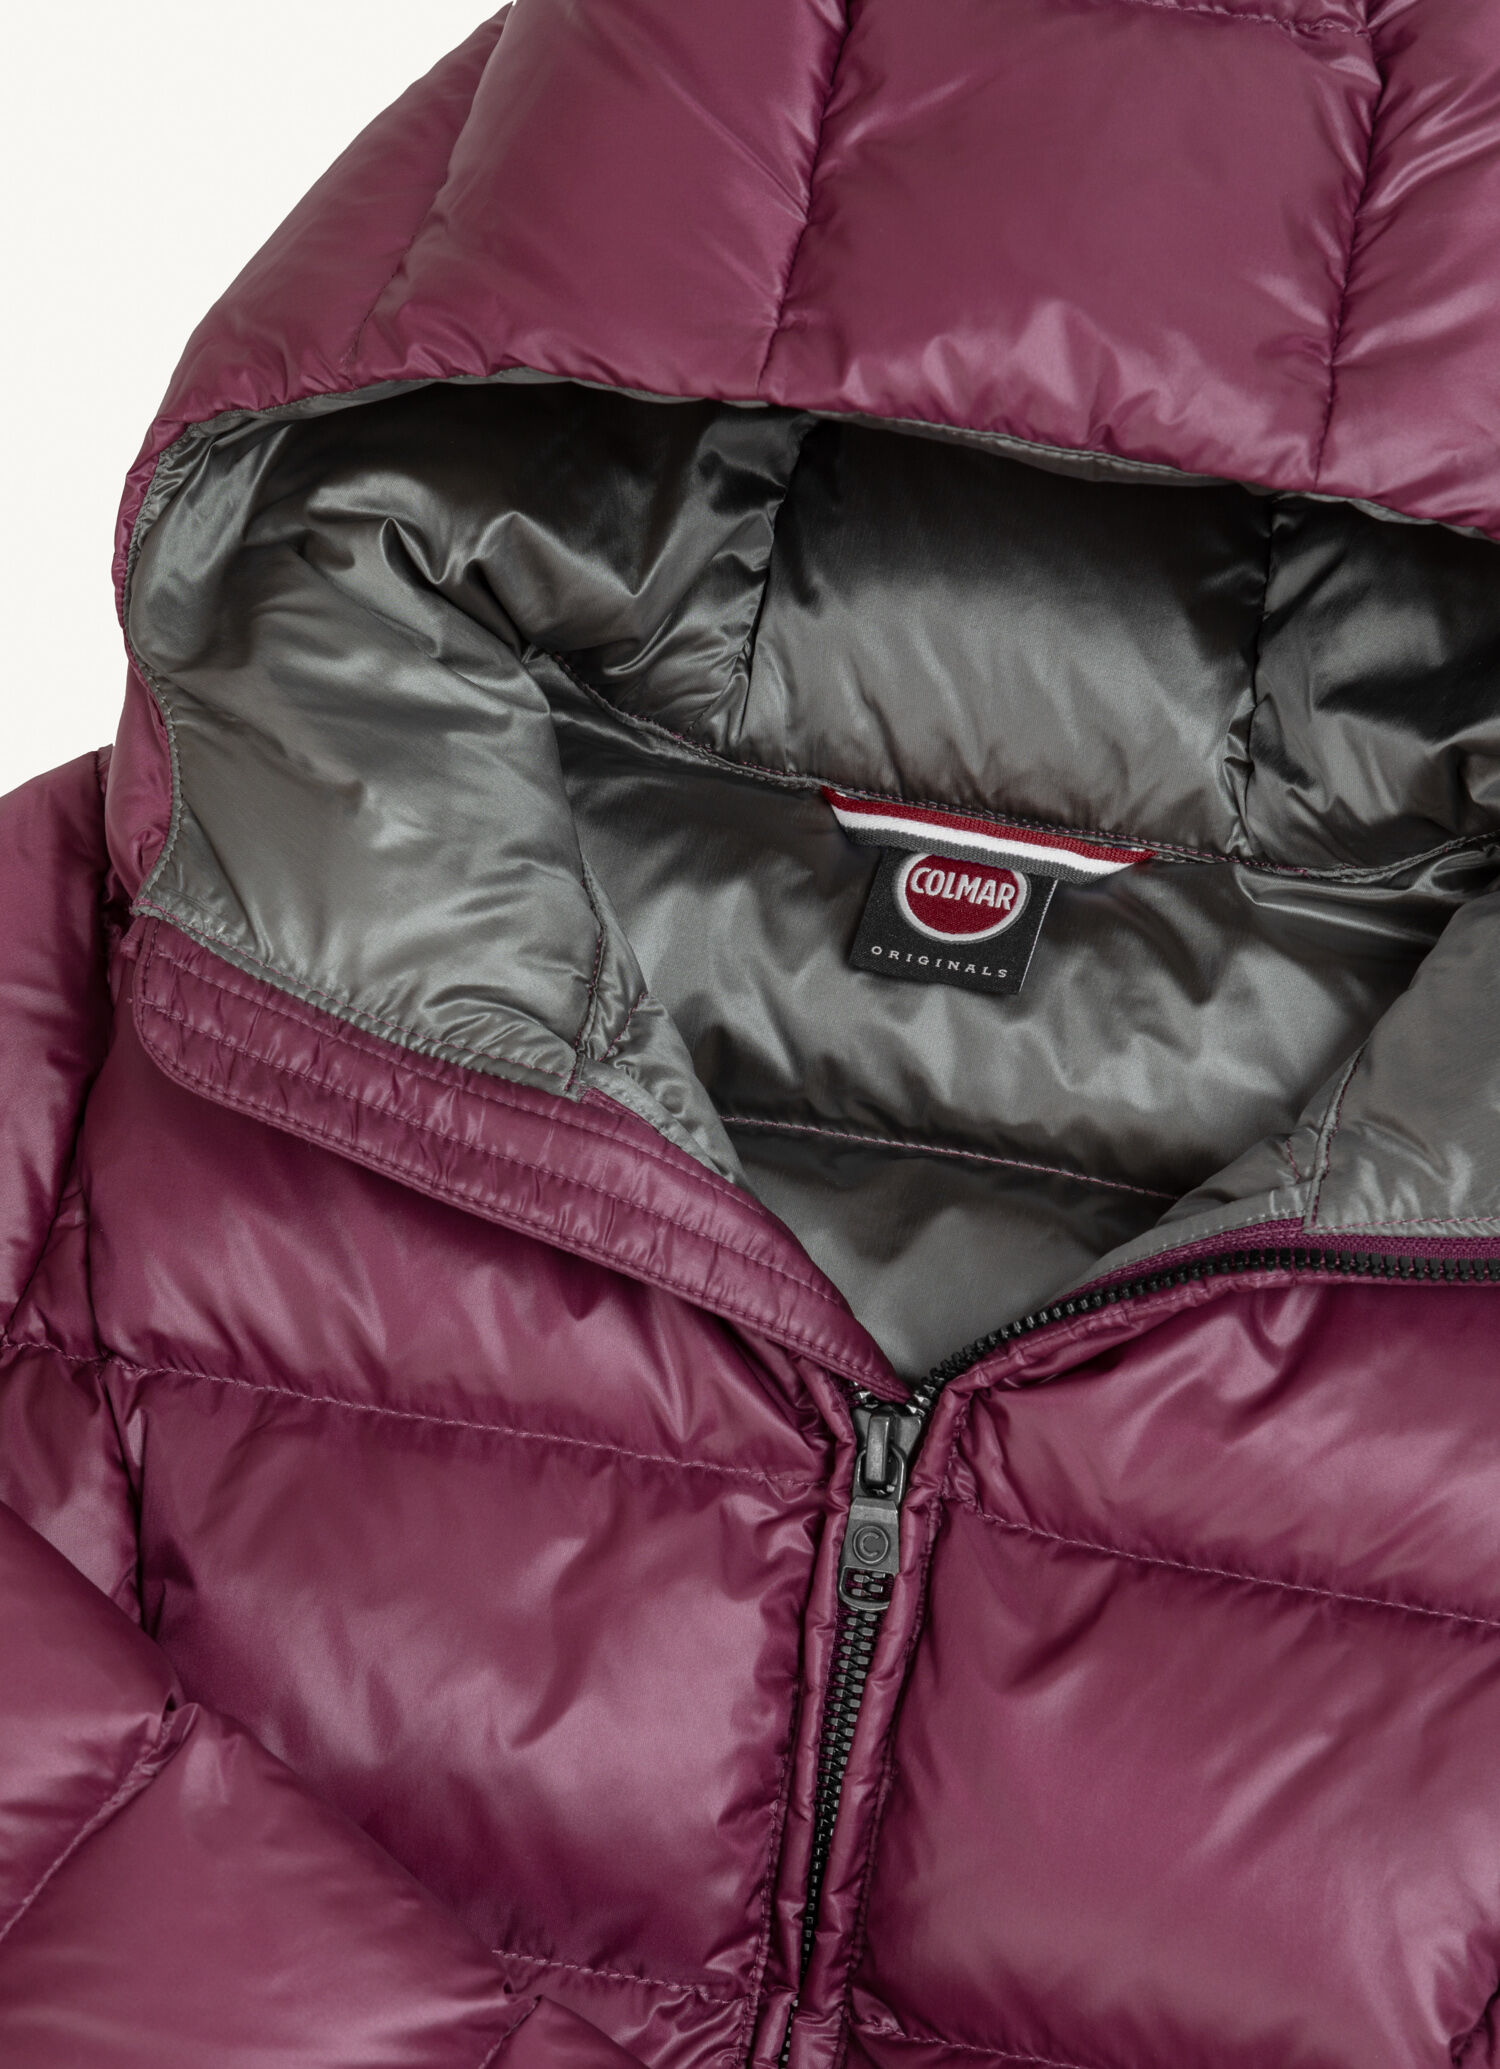 Down jacket with fixed hood - Colmar